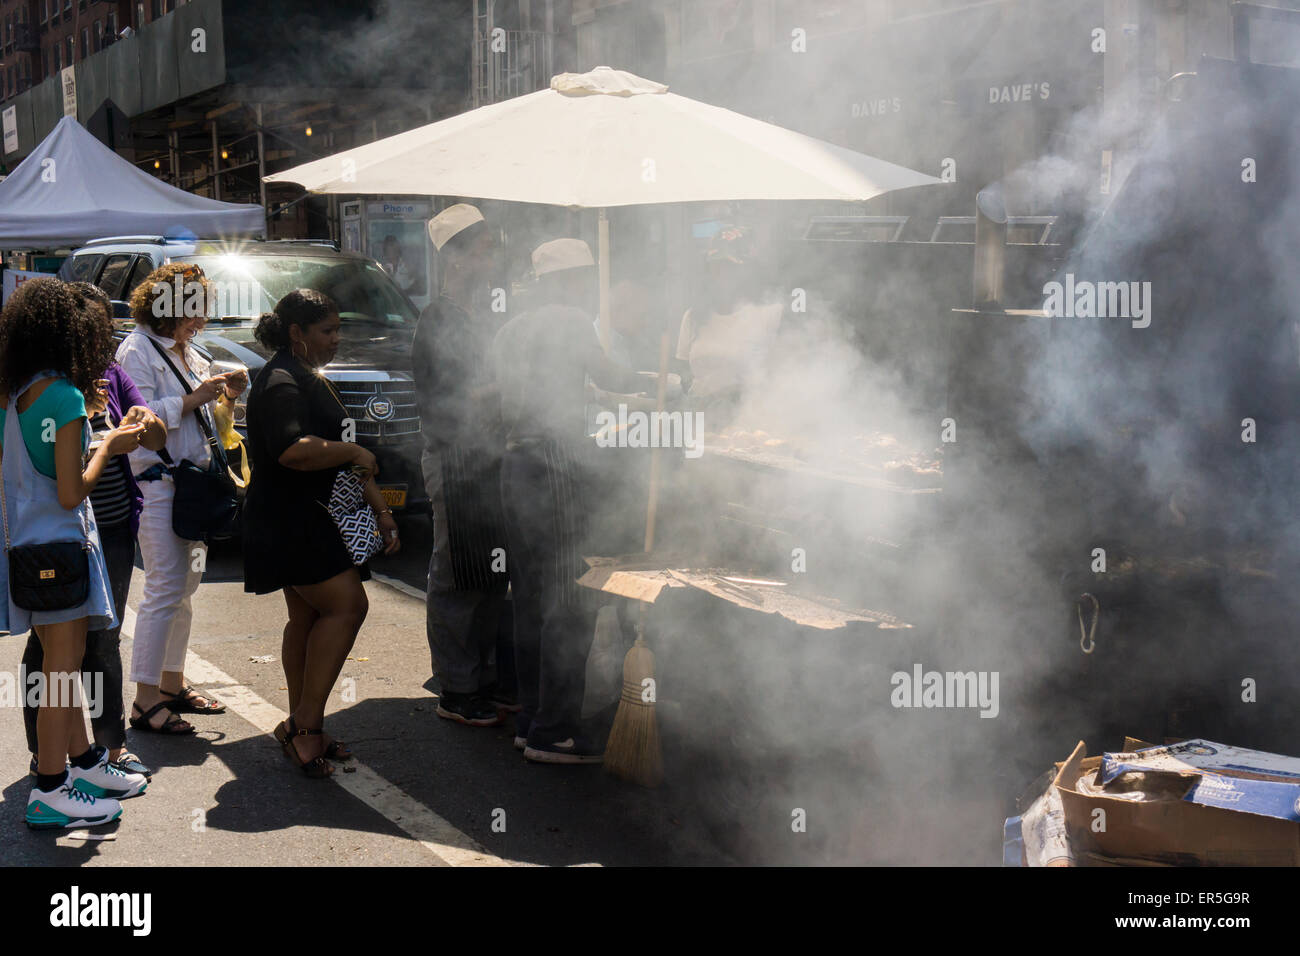 A vendor smokes jerk chicken and smokes up the air at a street fair in the Chelsea neighborhood of New York on Monday, May 25, 2015. (© Richard B. Levine) Stock Photo